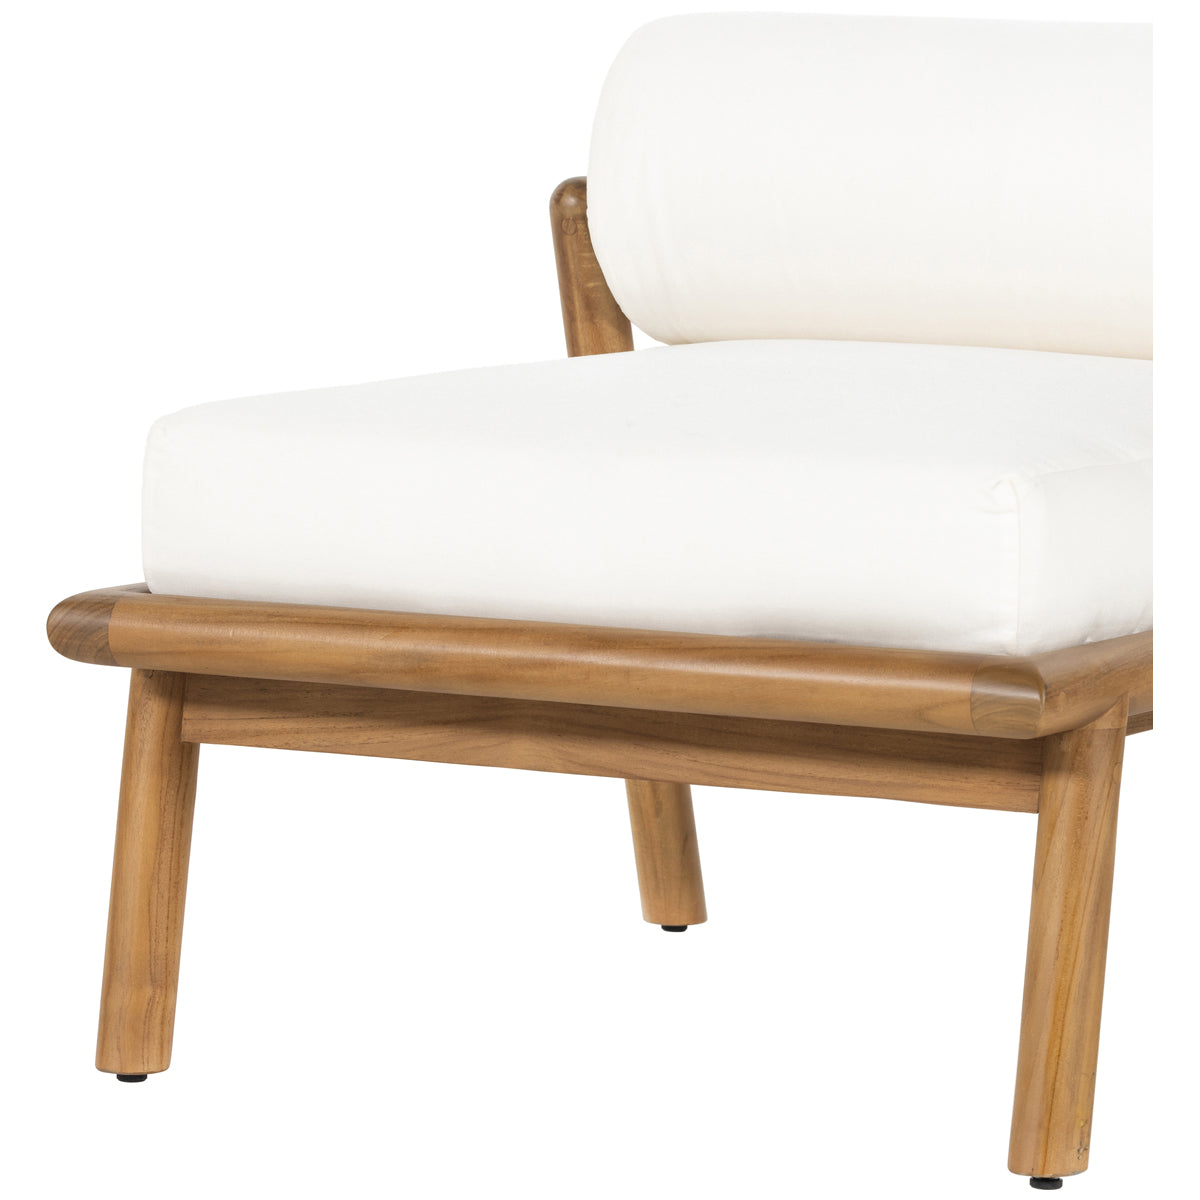 Four Hands Solano Emmy Outdoor Chair - Natural Teak